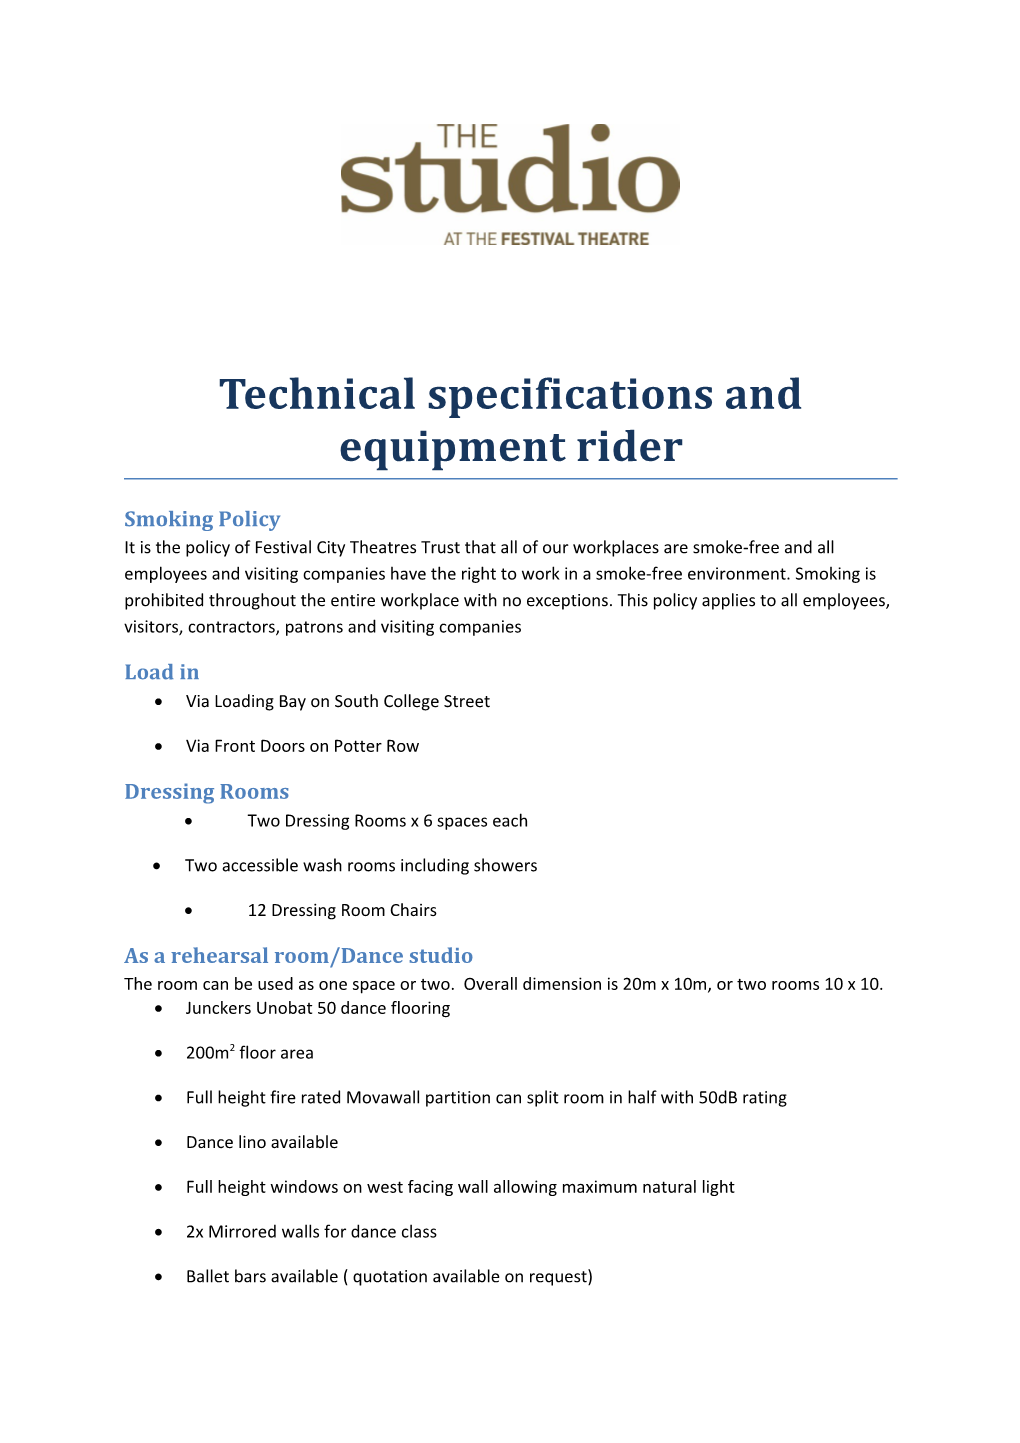 Technical Specifications and Equipment Rider